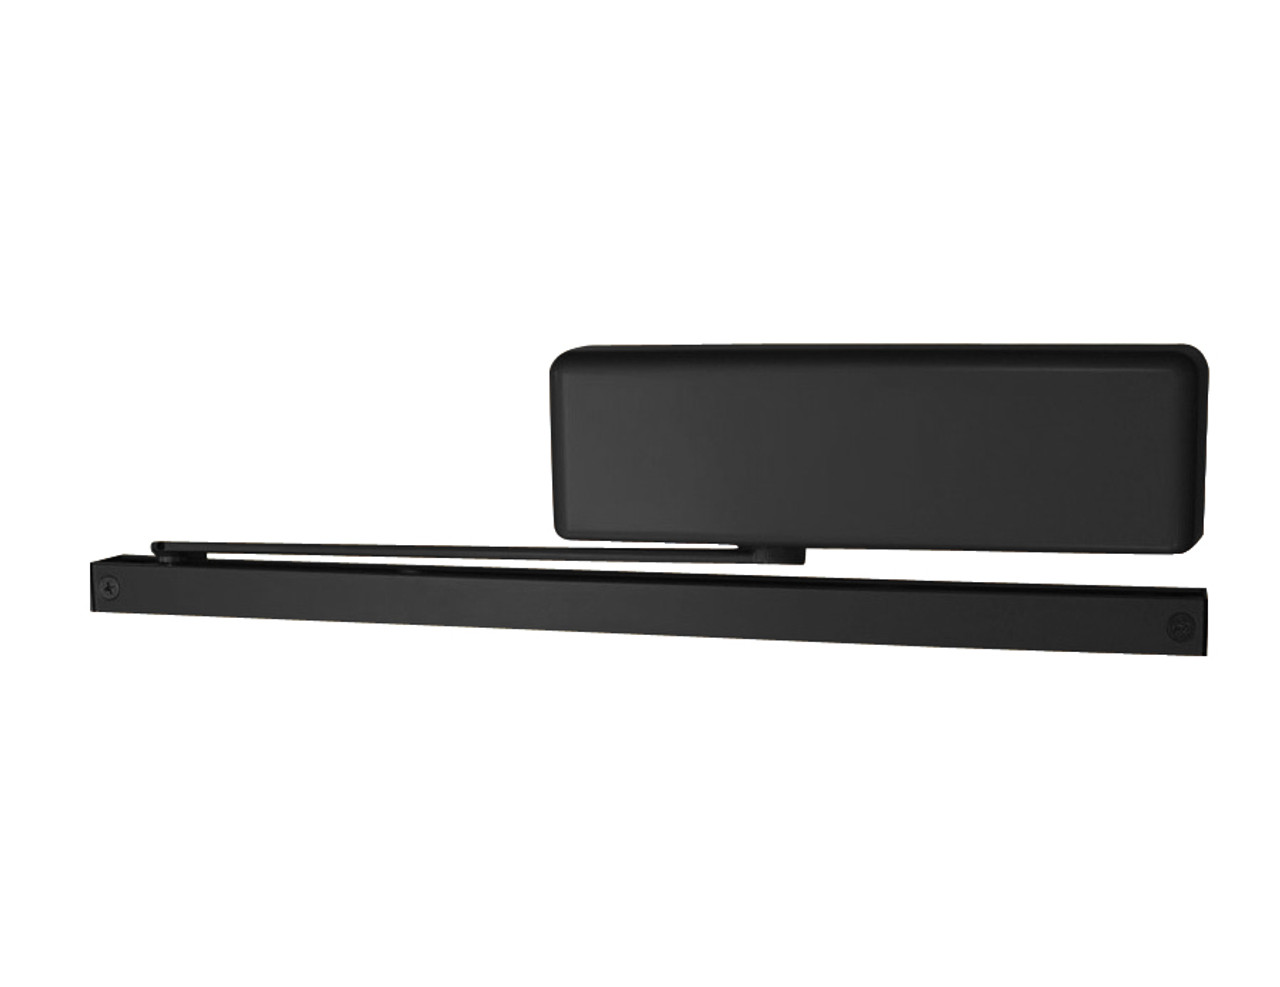 4021T-H-LH-BLACK LCN Door Closer with Hold-Open Arm in Black Finish